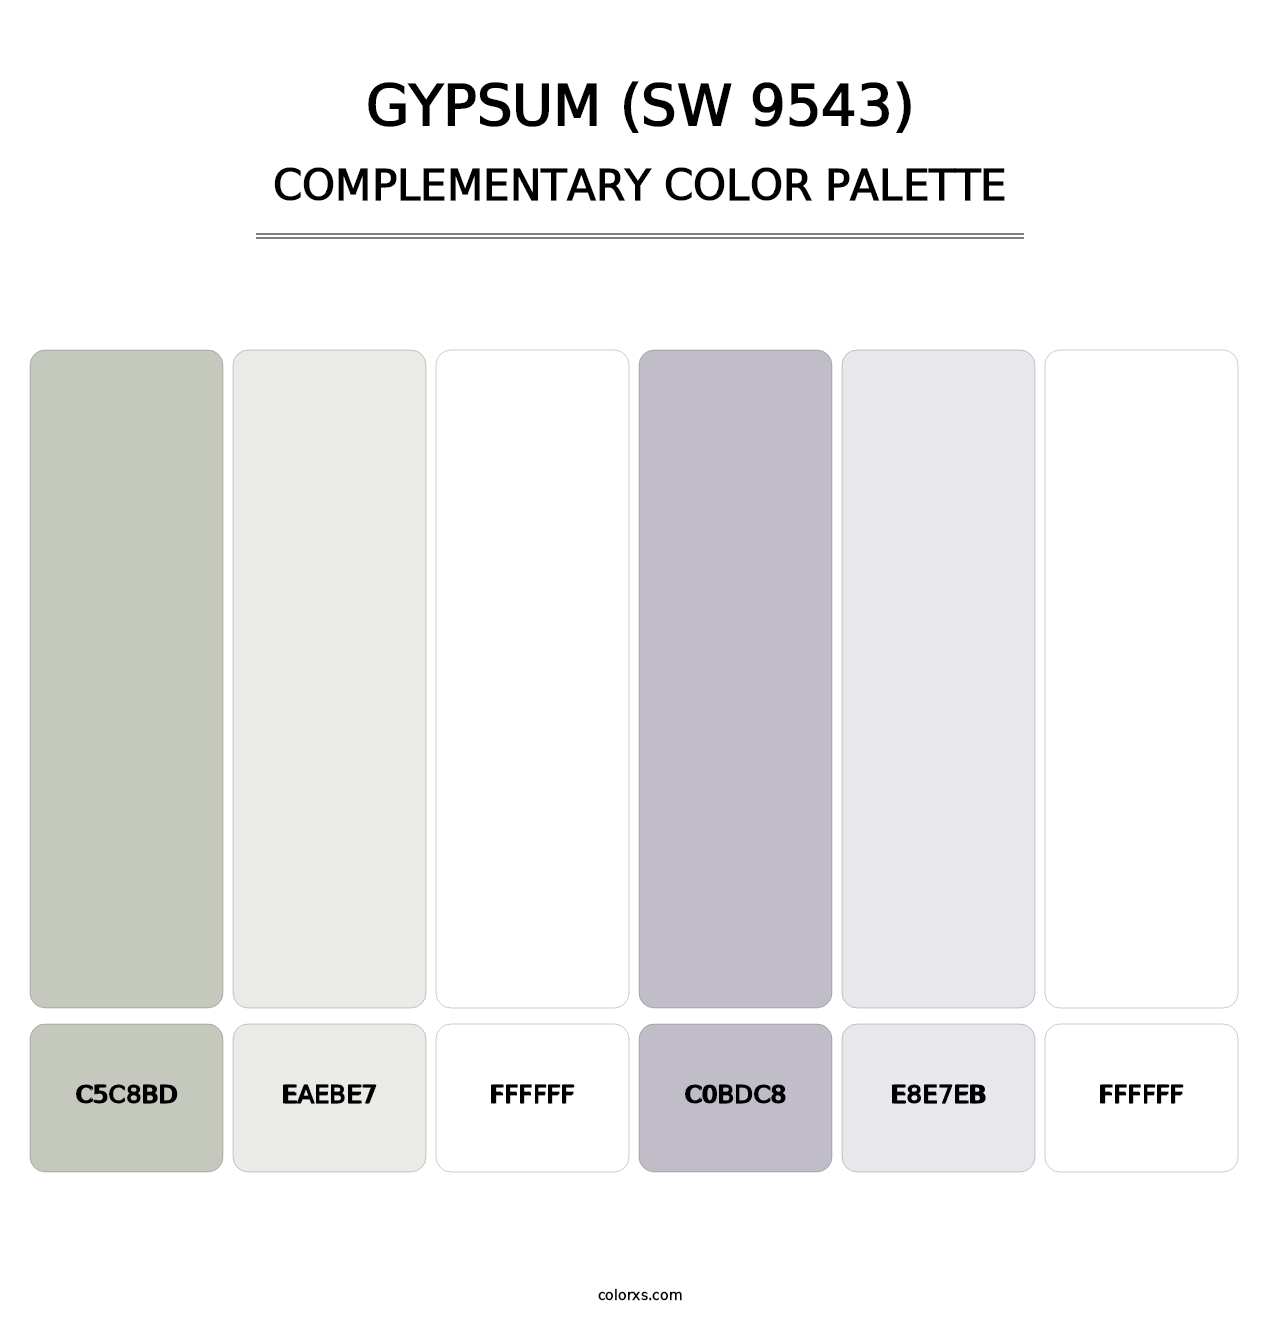 Gypsum (SW 9543) - Complementary Color Palette